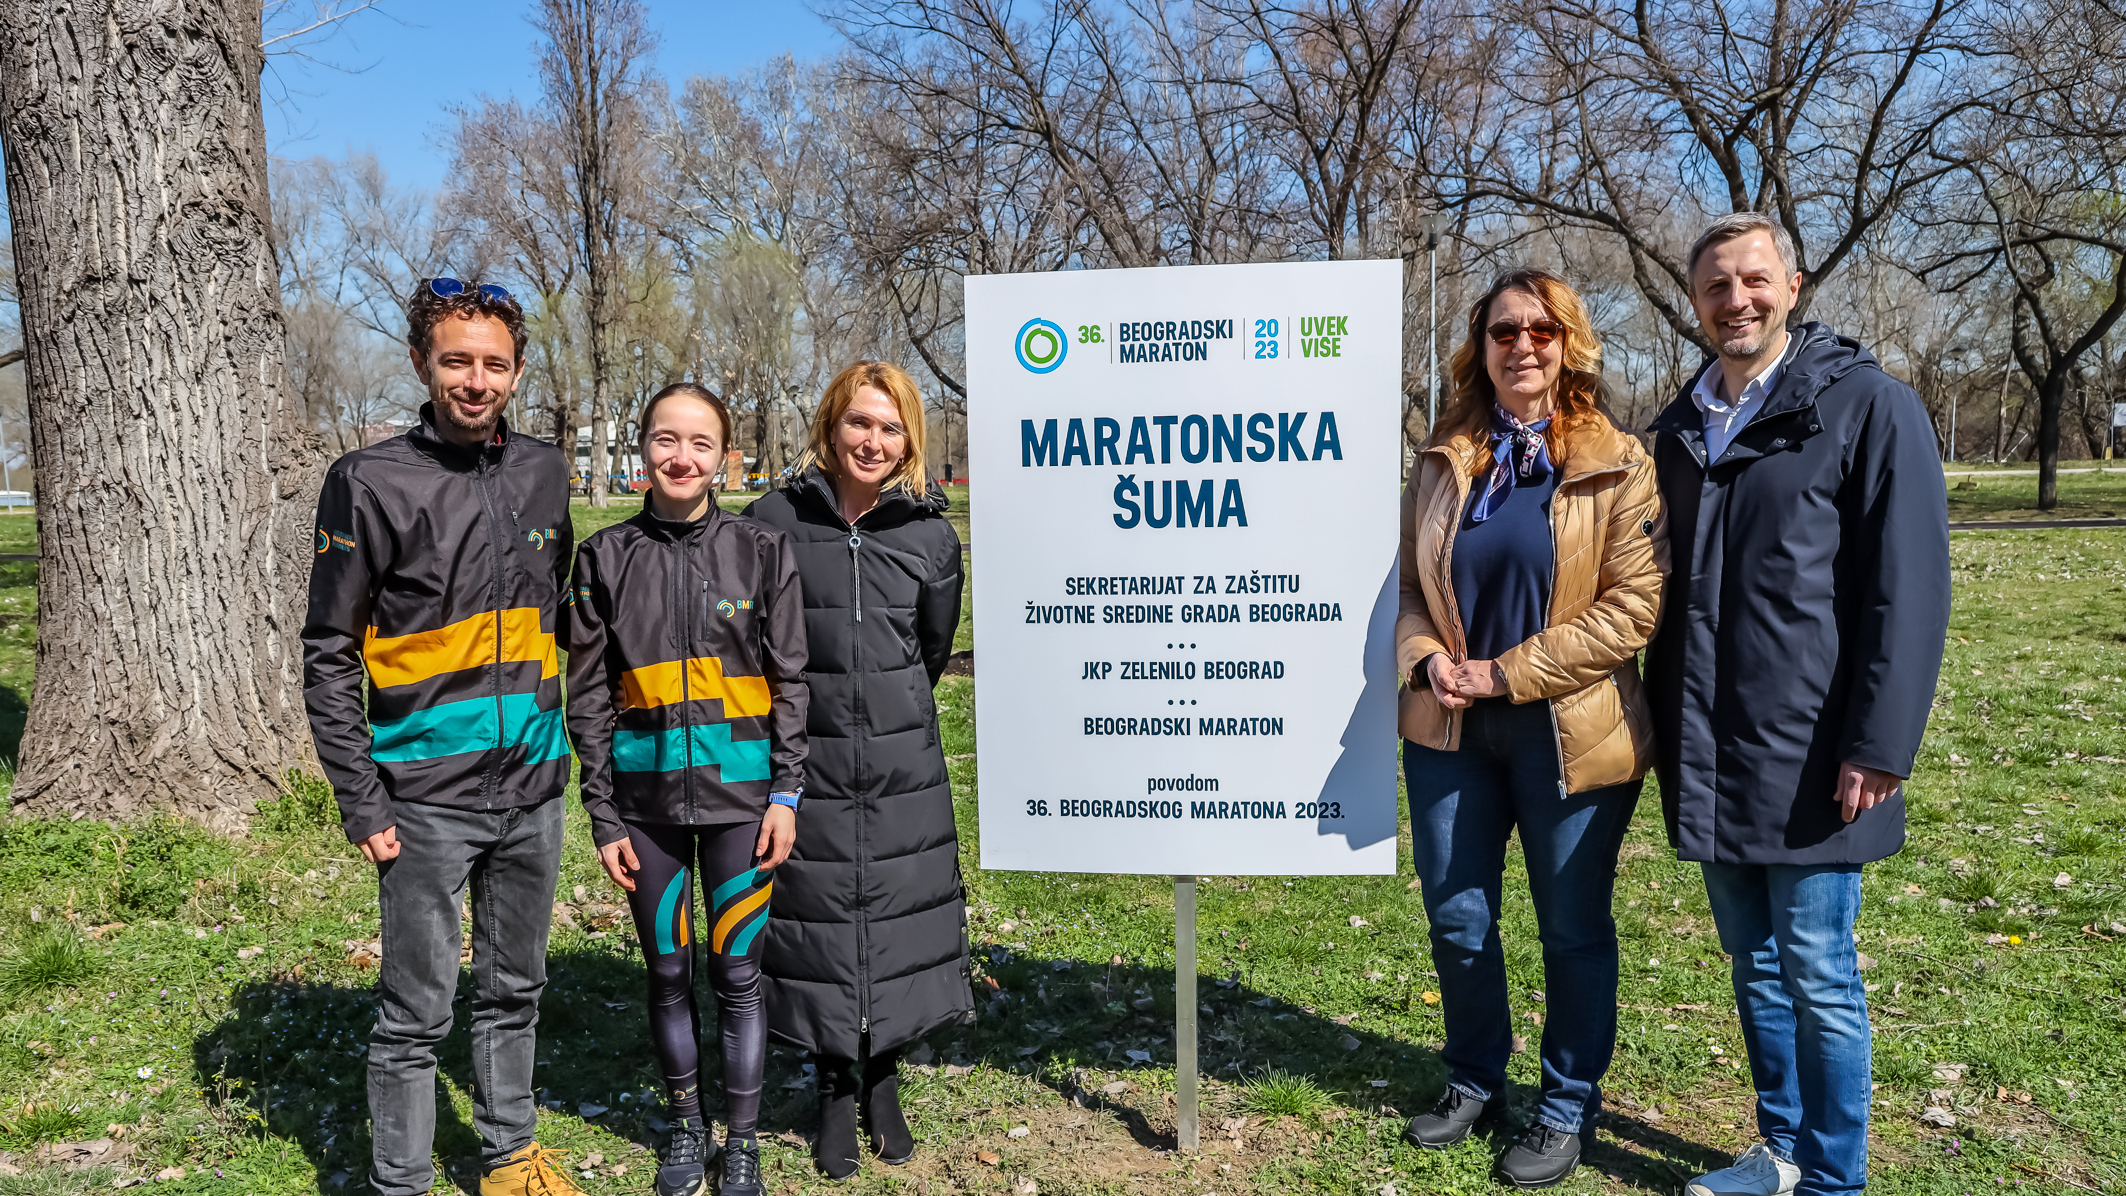 The Marathon Forest is richer by 36 new trees